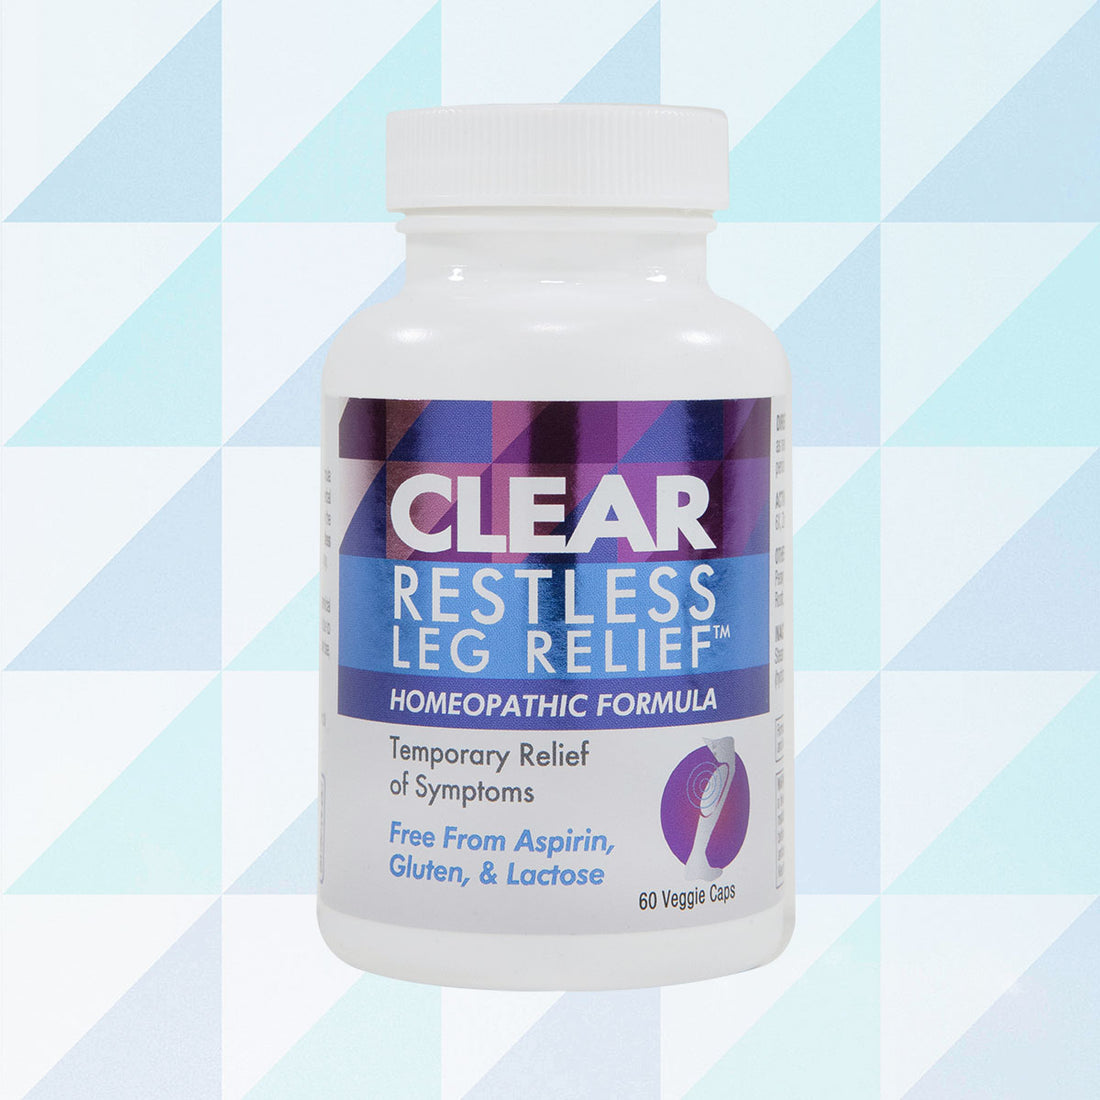 Clear Restless Leg Relief